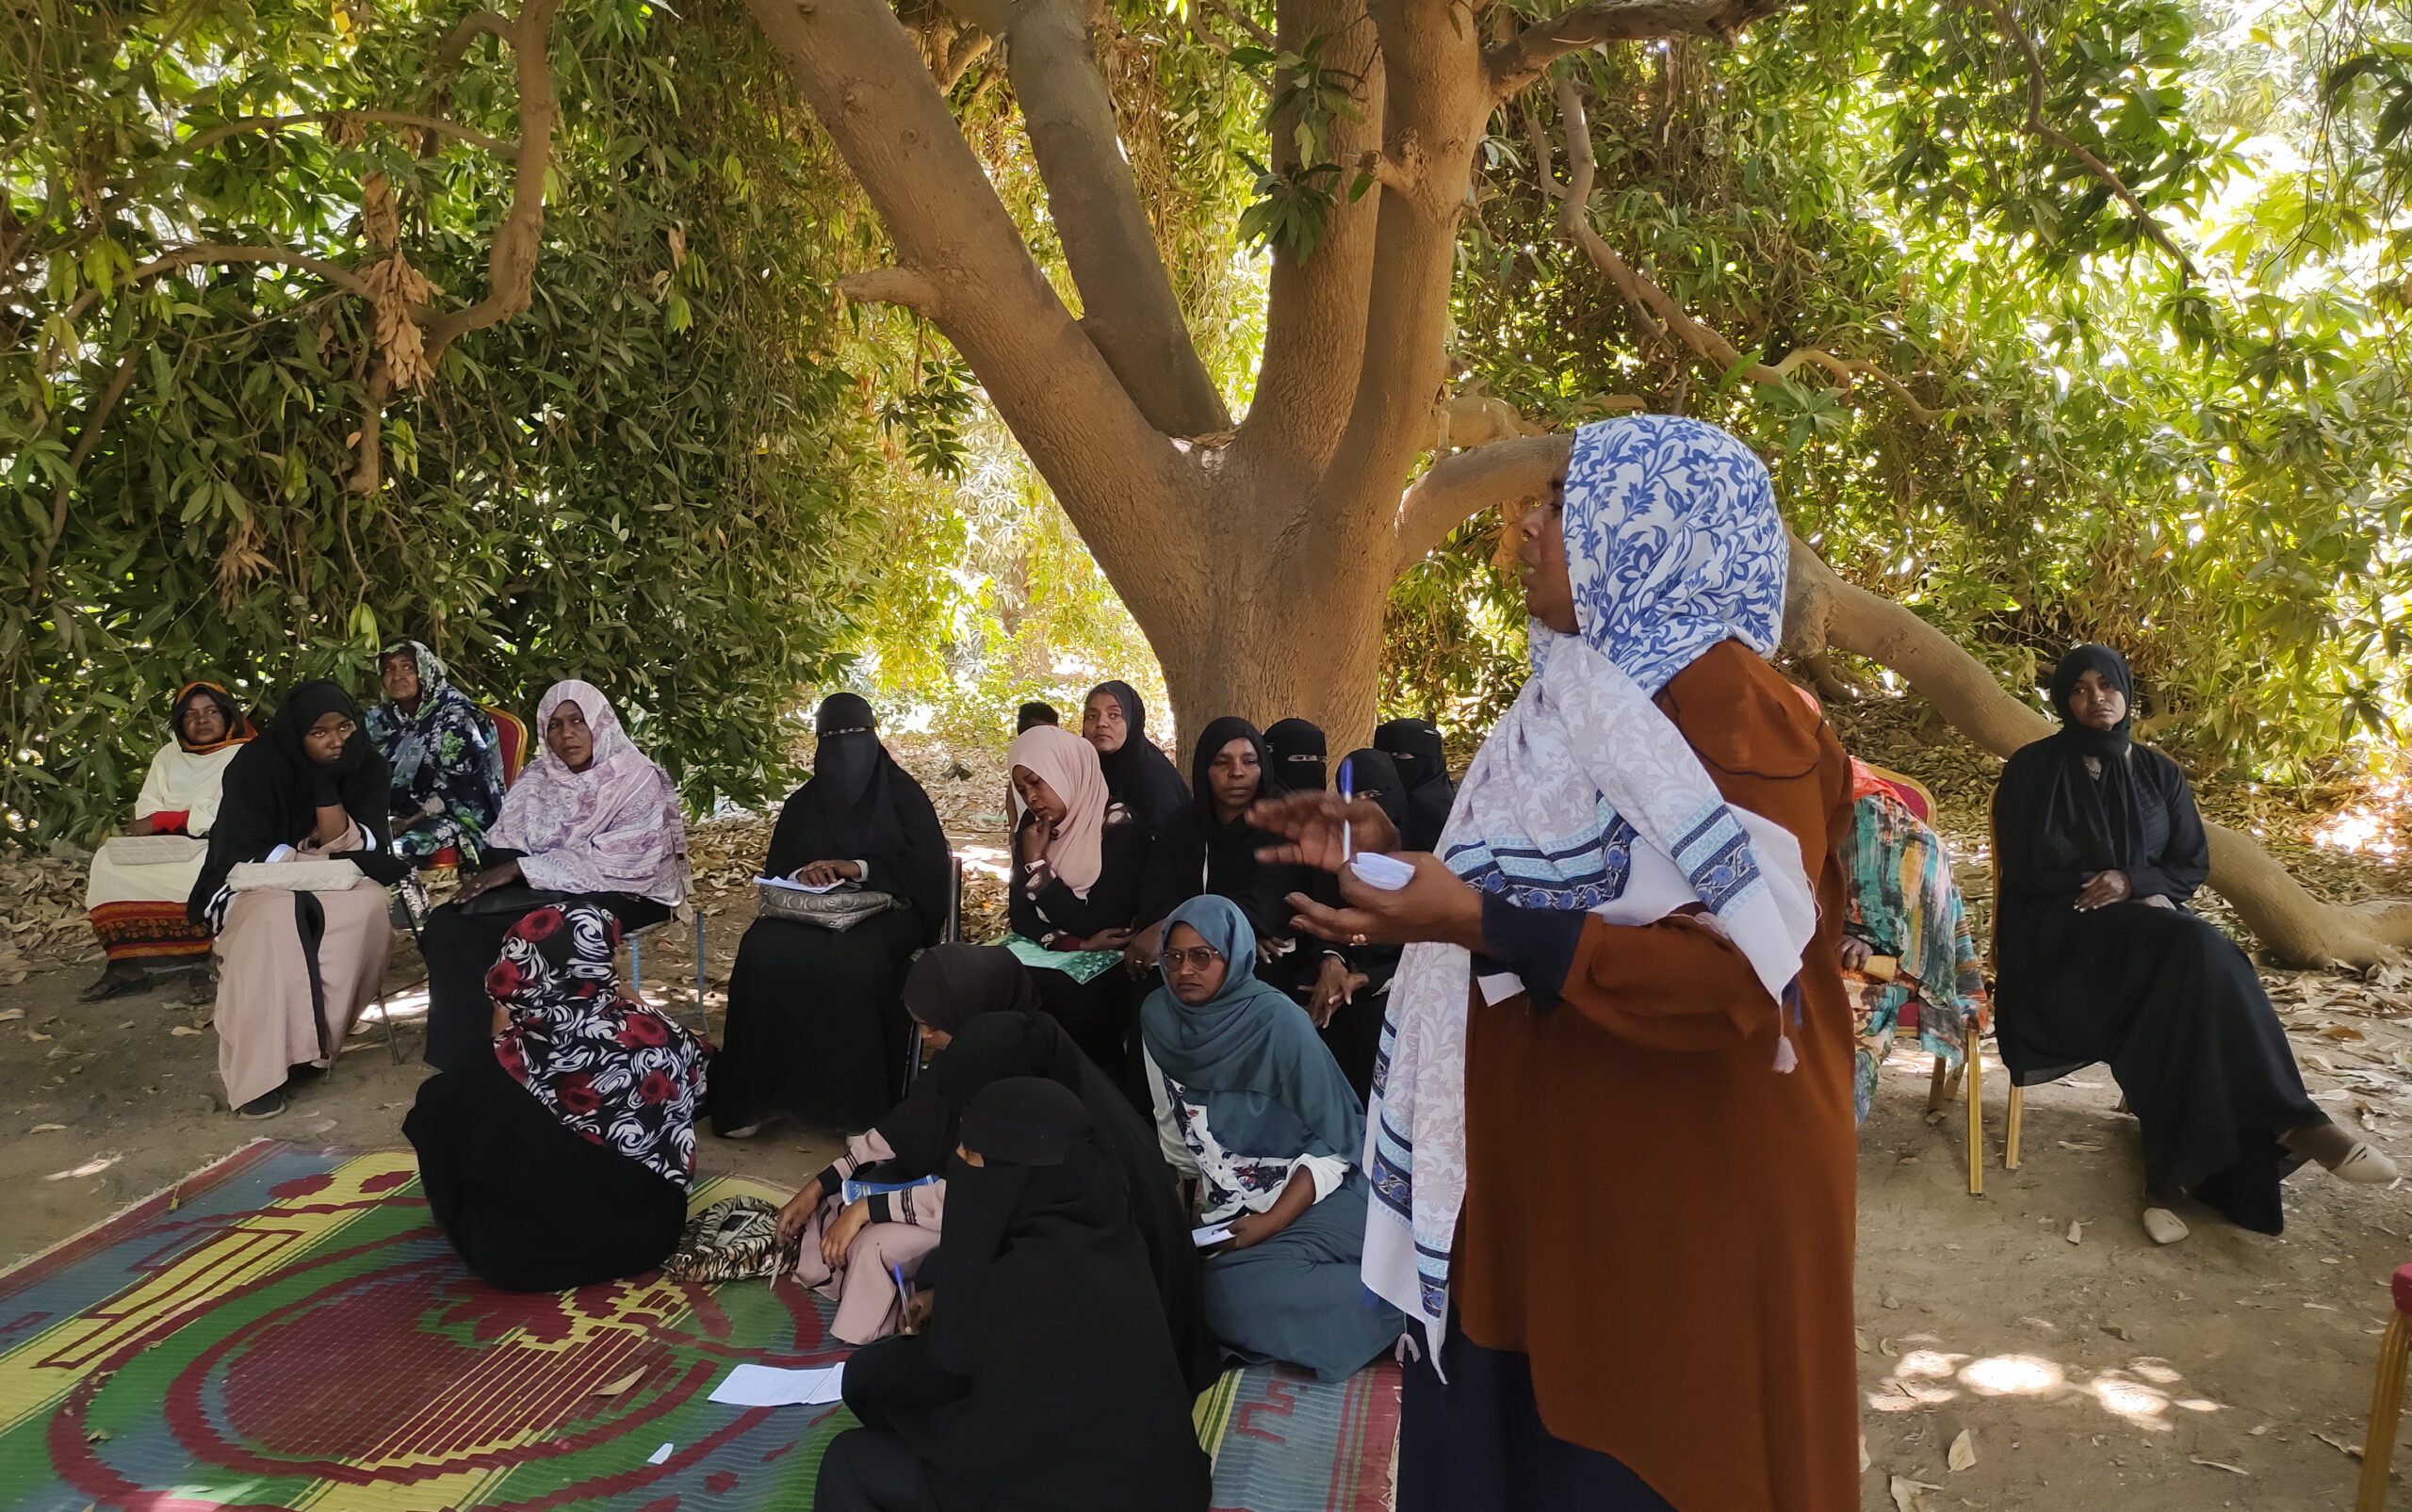 A group of women, some seated and others standing, are gathered outside under a large tree. One woman stands and speaks while others listen attentively. They appear to be in a communal meeting.